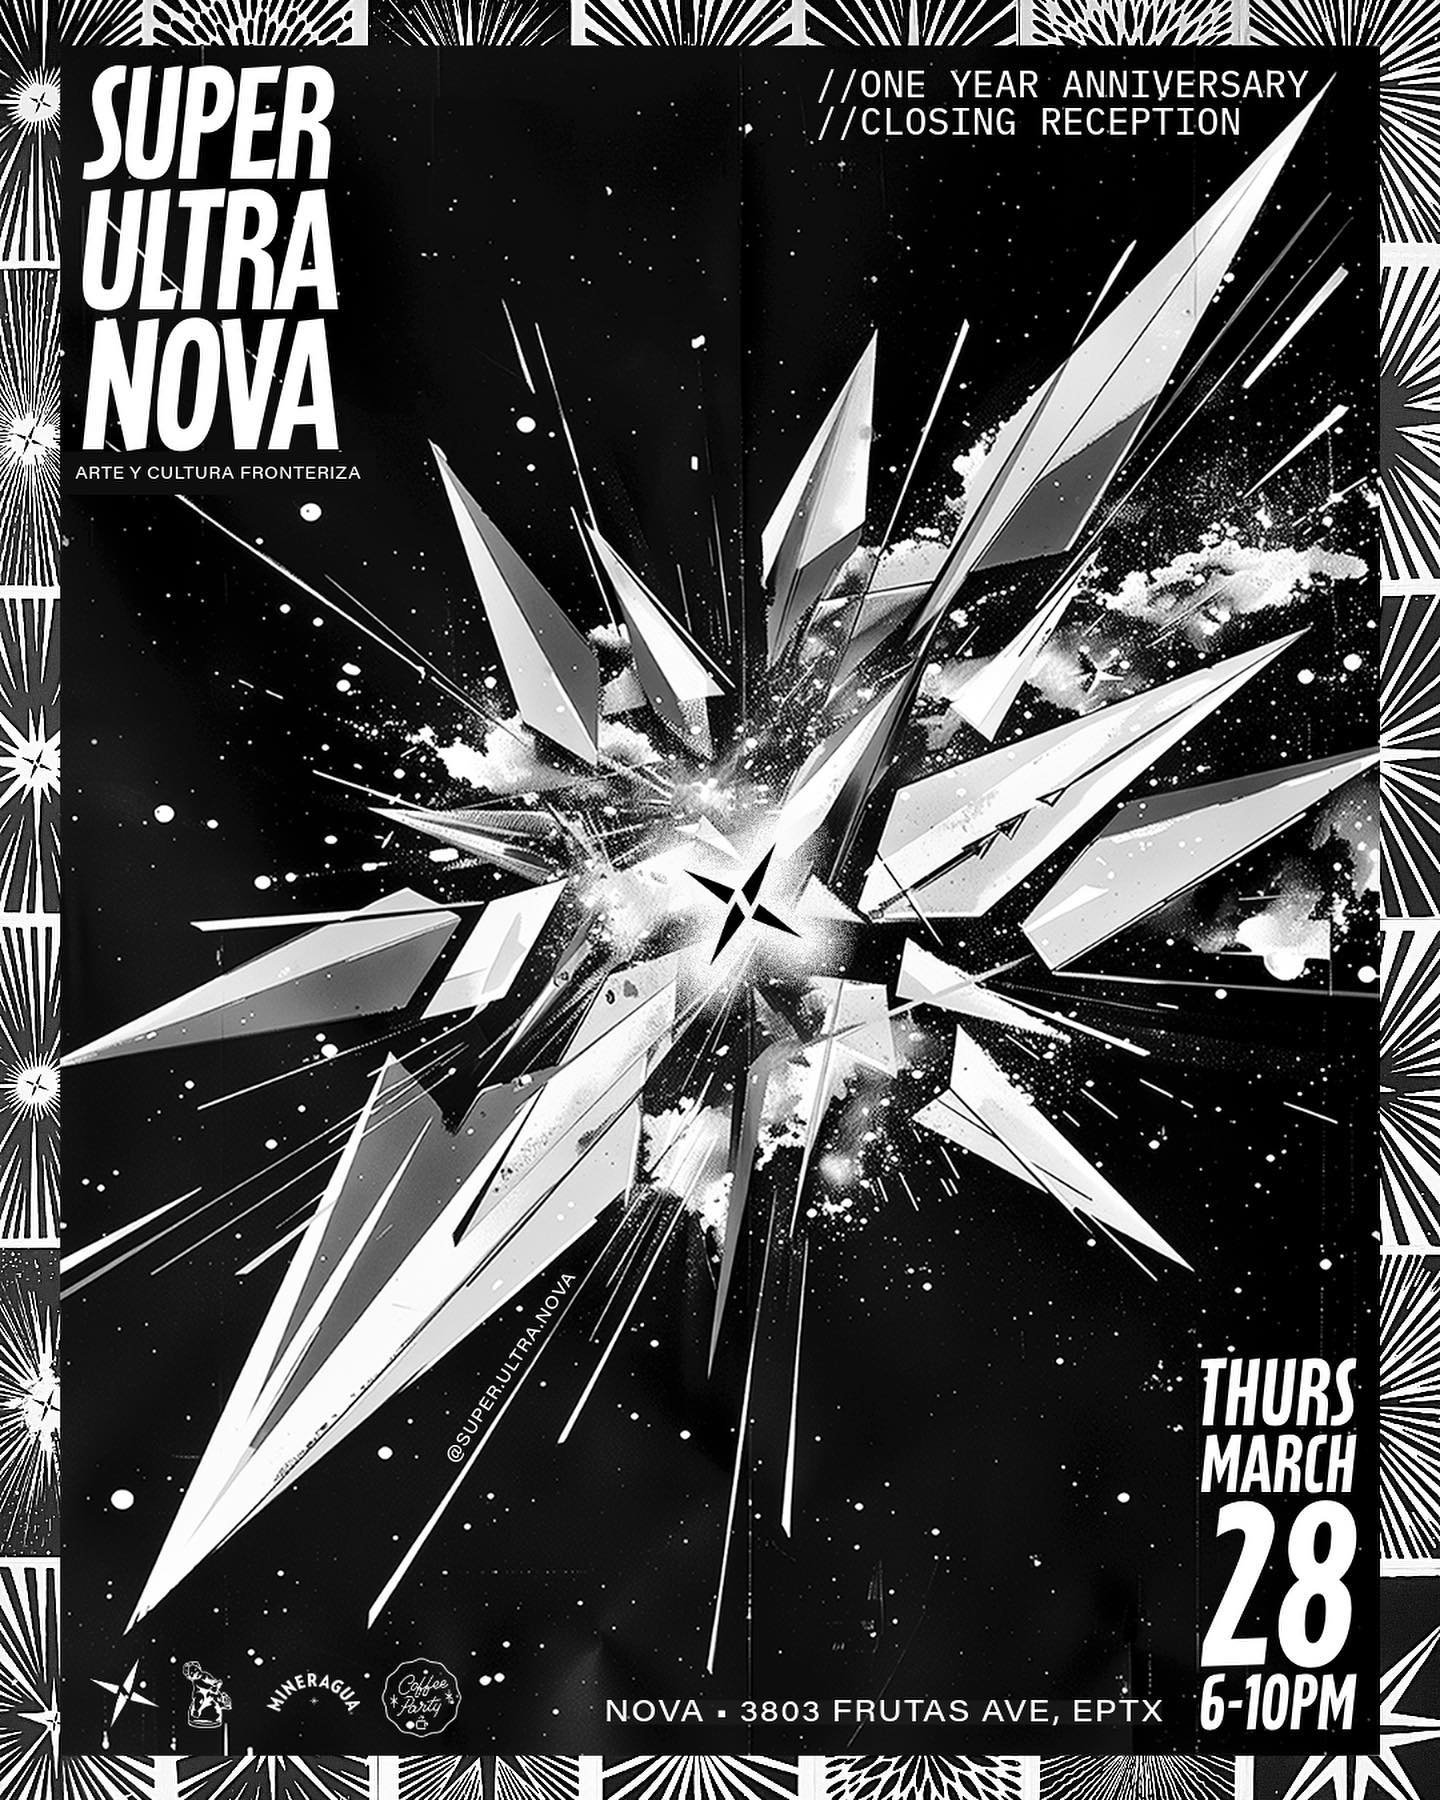 TOMORROW! Last Thursday March 28th, we celebrate the 1 Year of 💥SUPER-ULTRA-NOVA💥 6-10PM ✨ see you there!